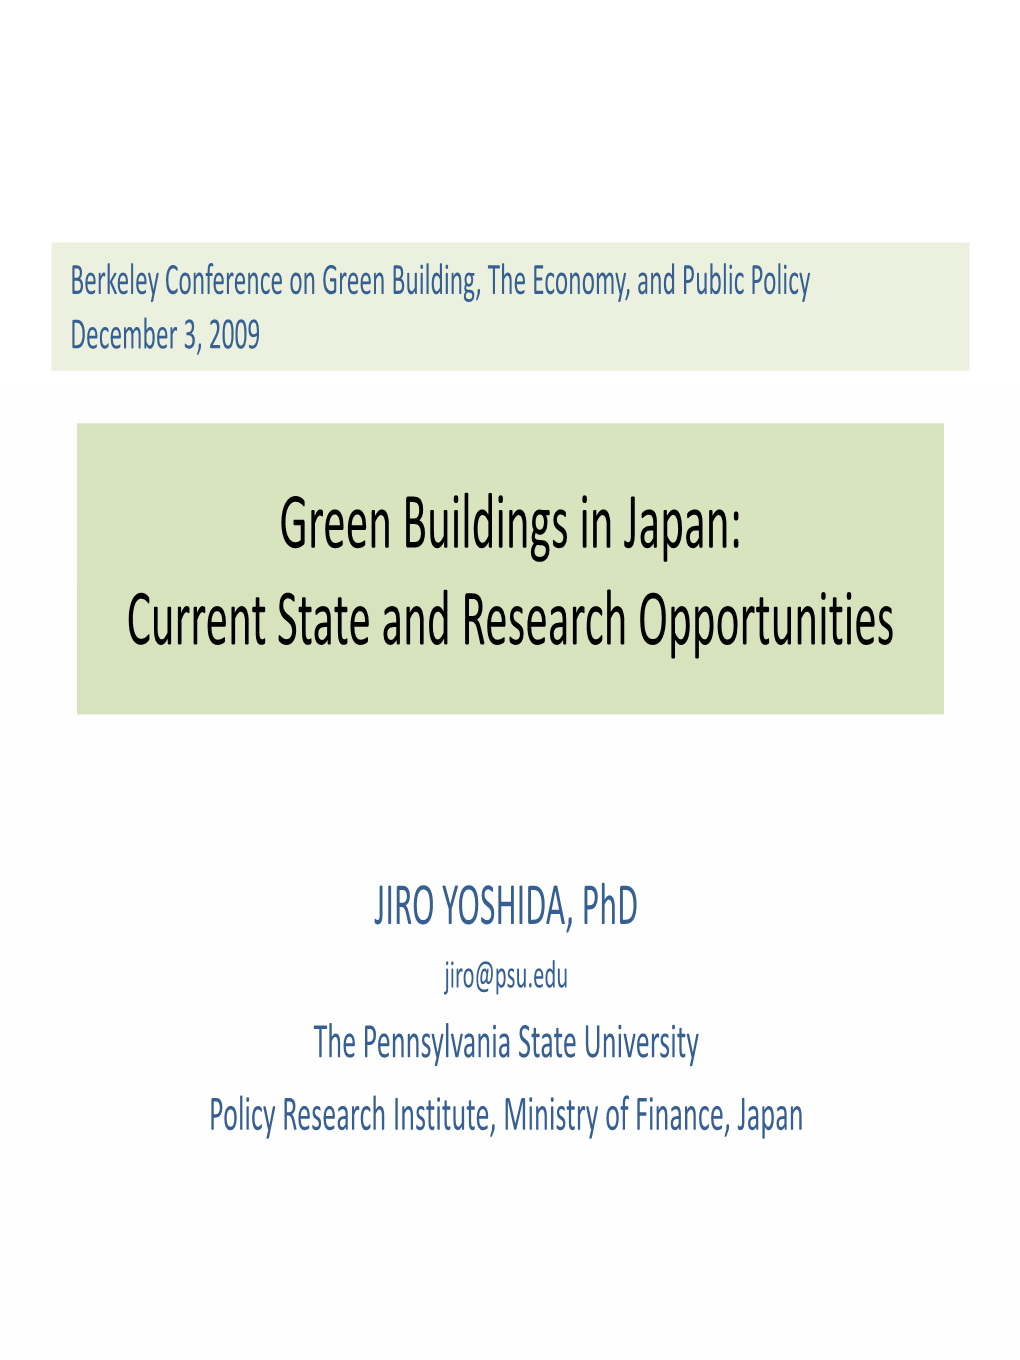 Green Buildings in Japan: Current State and Research Opportunities